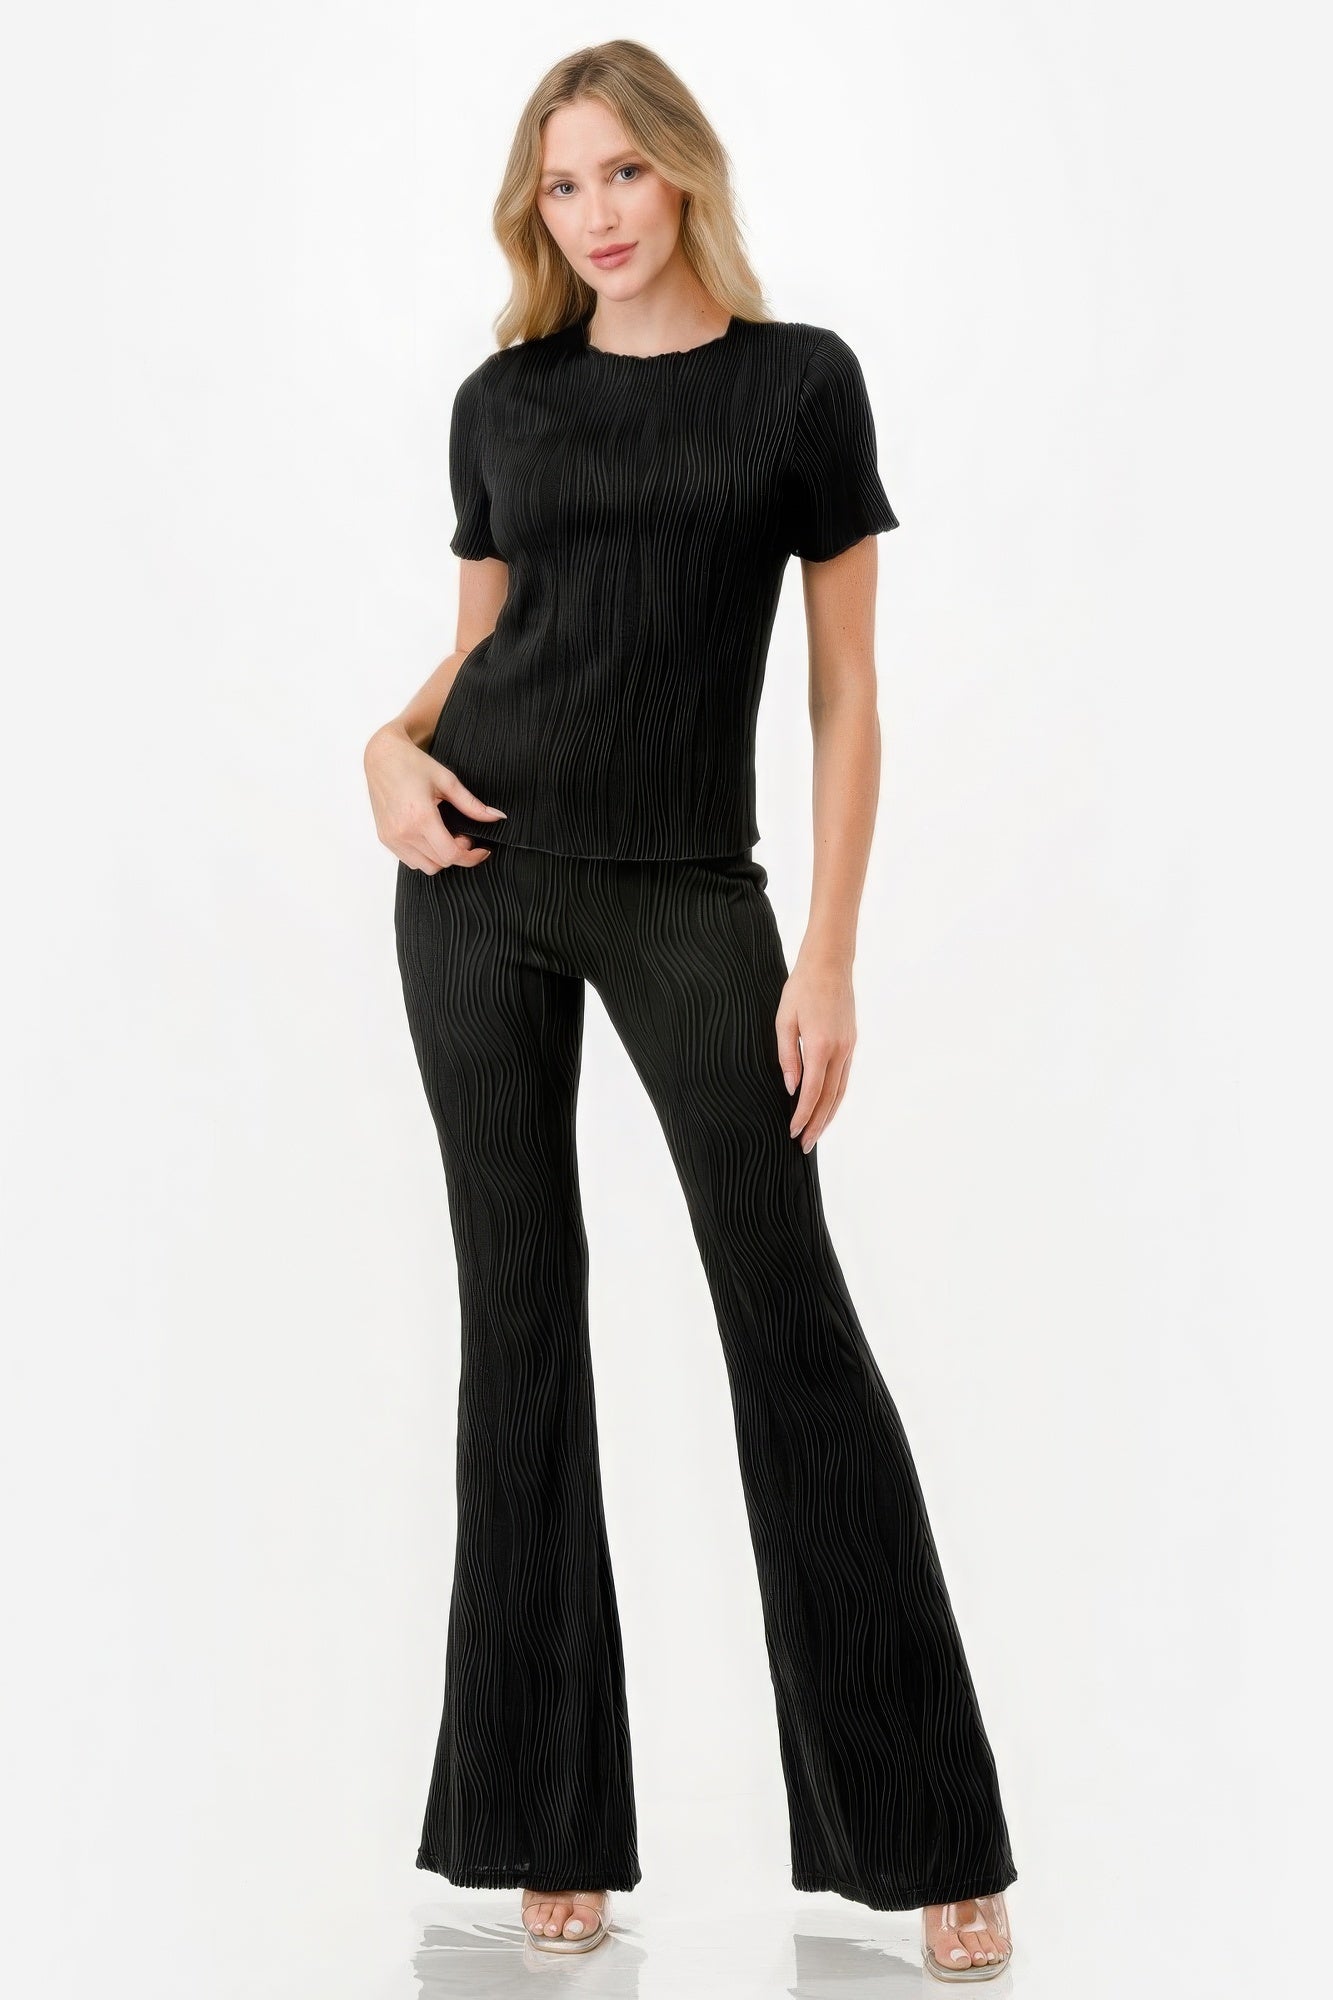 Short Sleeve Crew Neck Shirt and Pleated Flare Pants Set